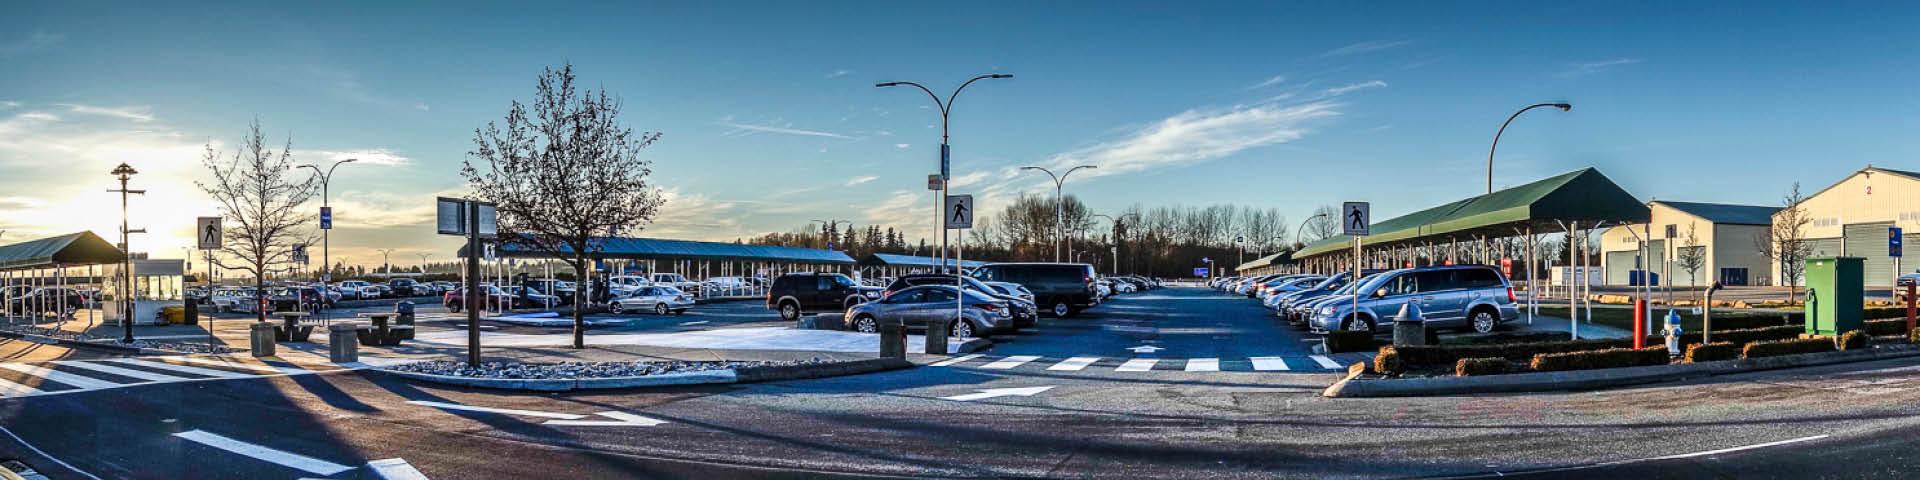 Image of airport parking